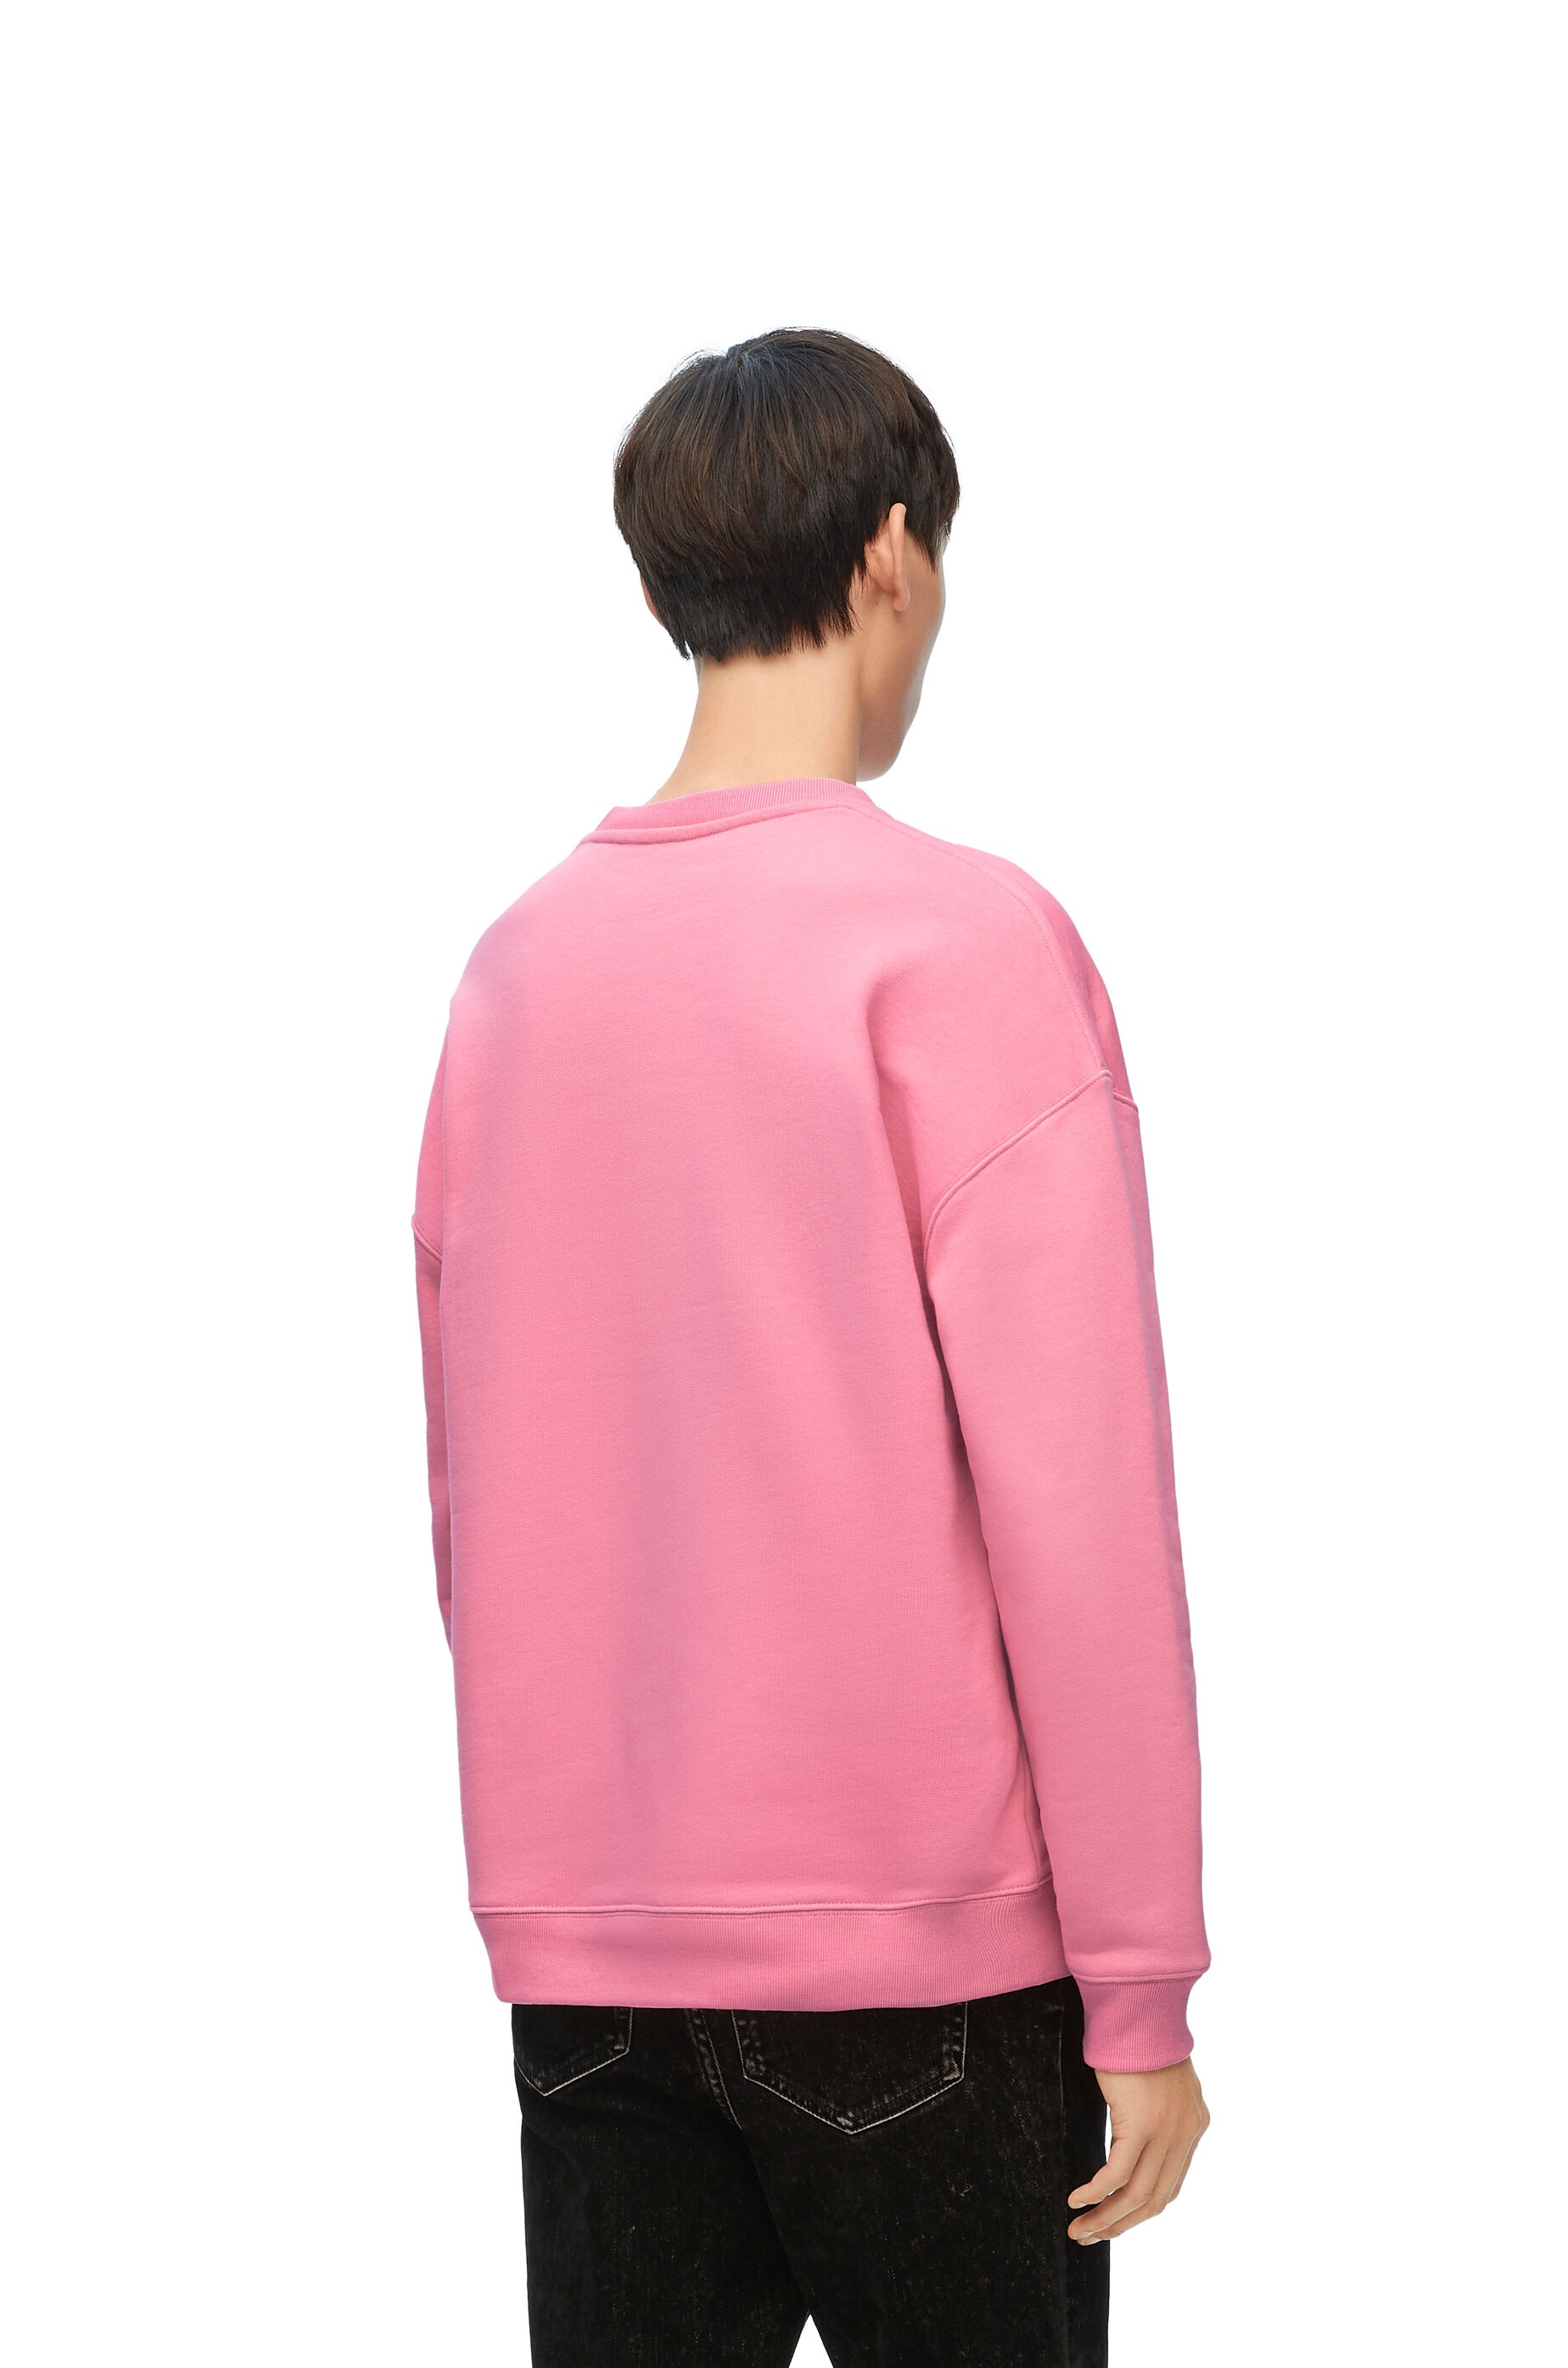 Relaxed fit sweatshirt in cotton - 4